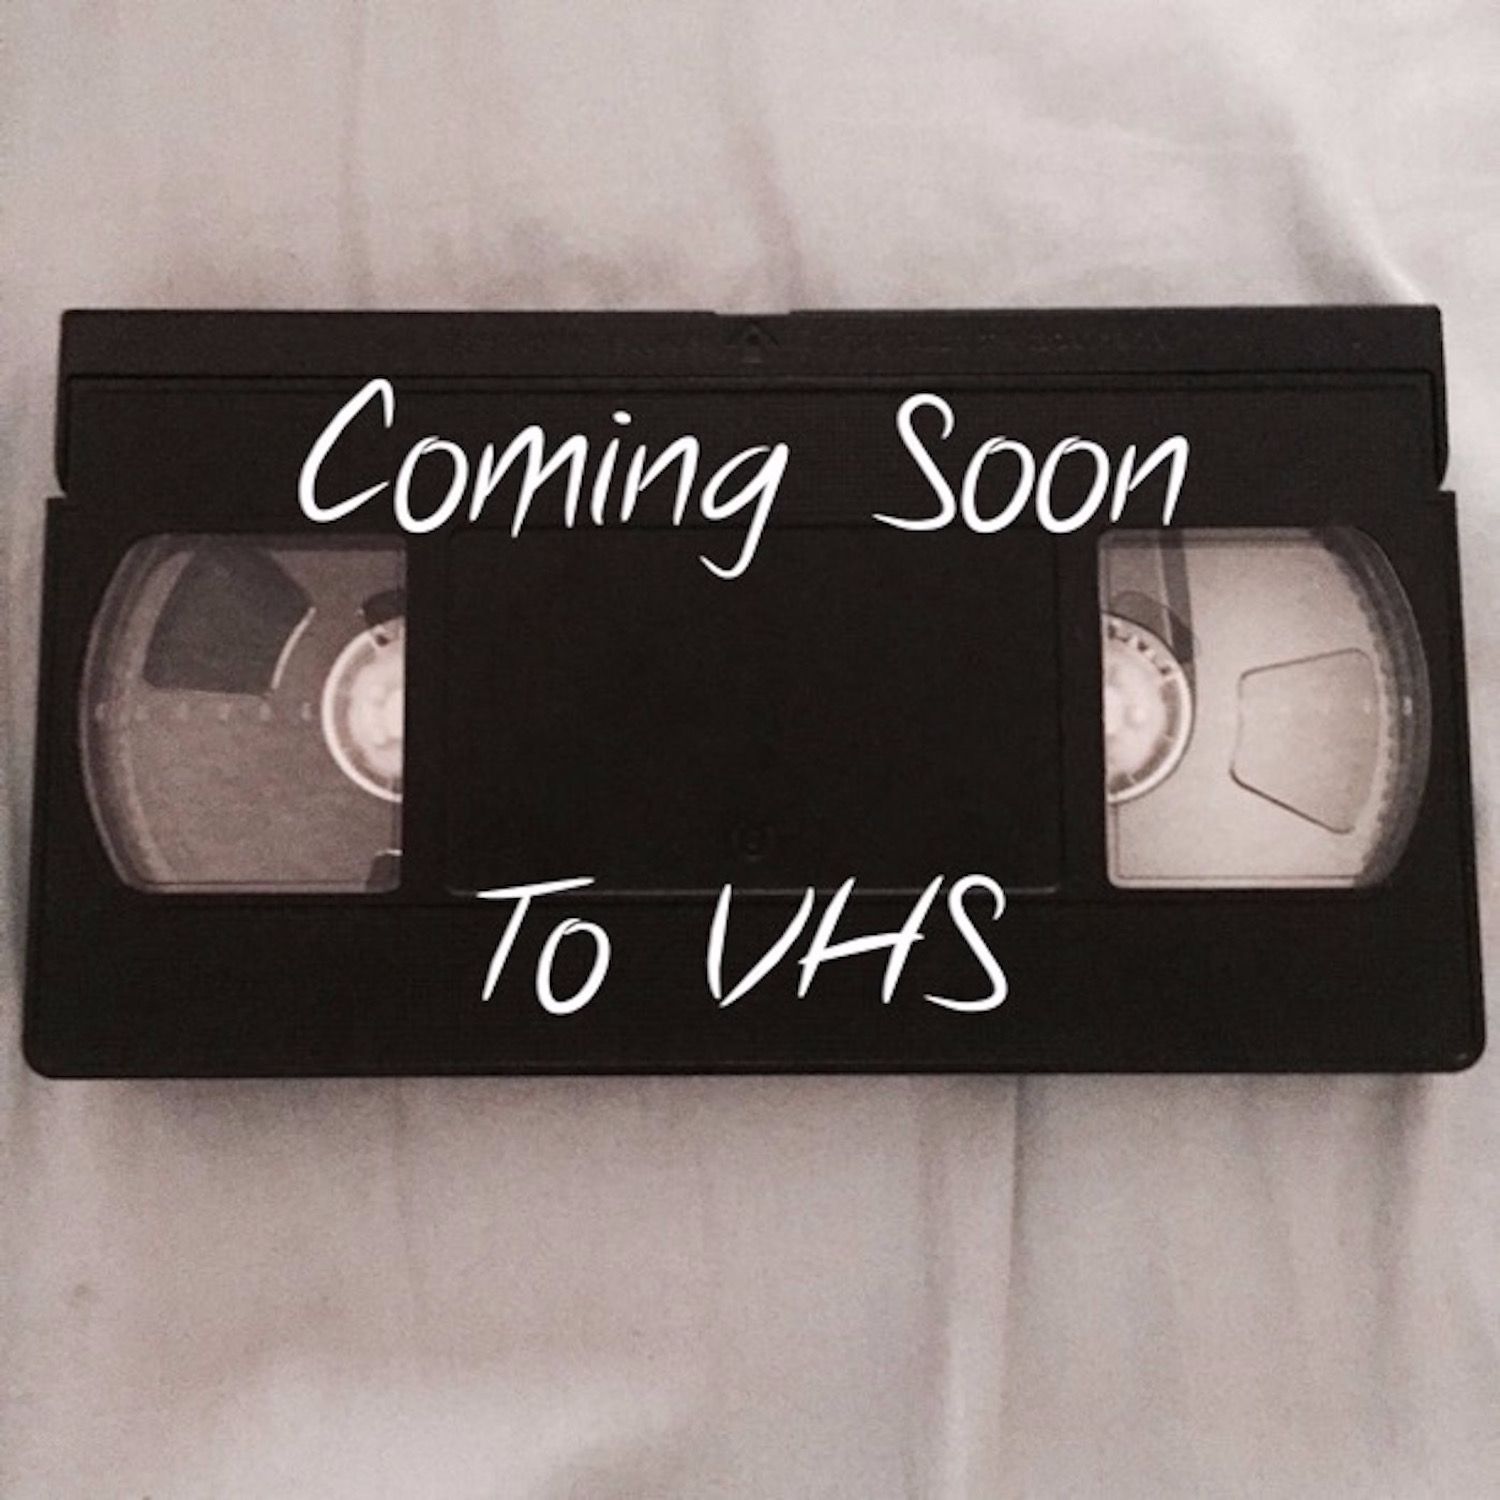 Coming Soon to VHS